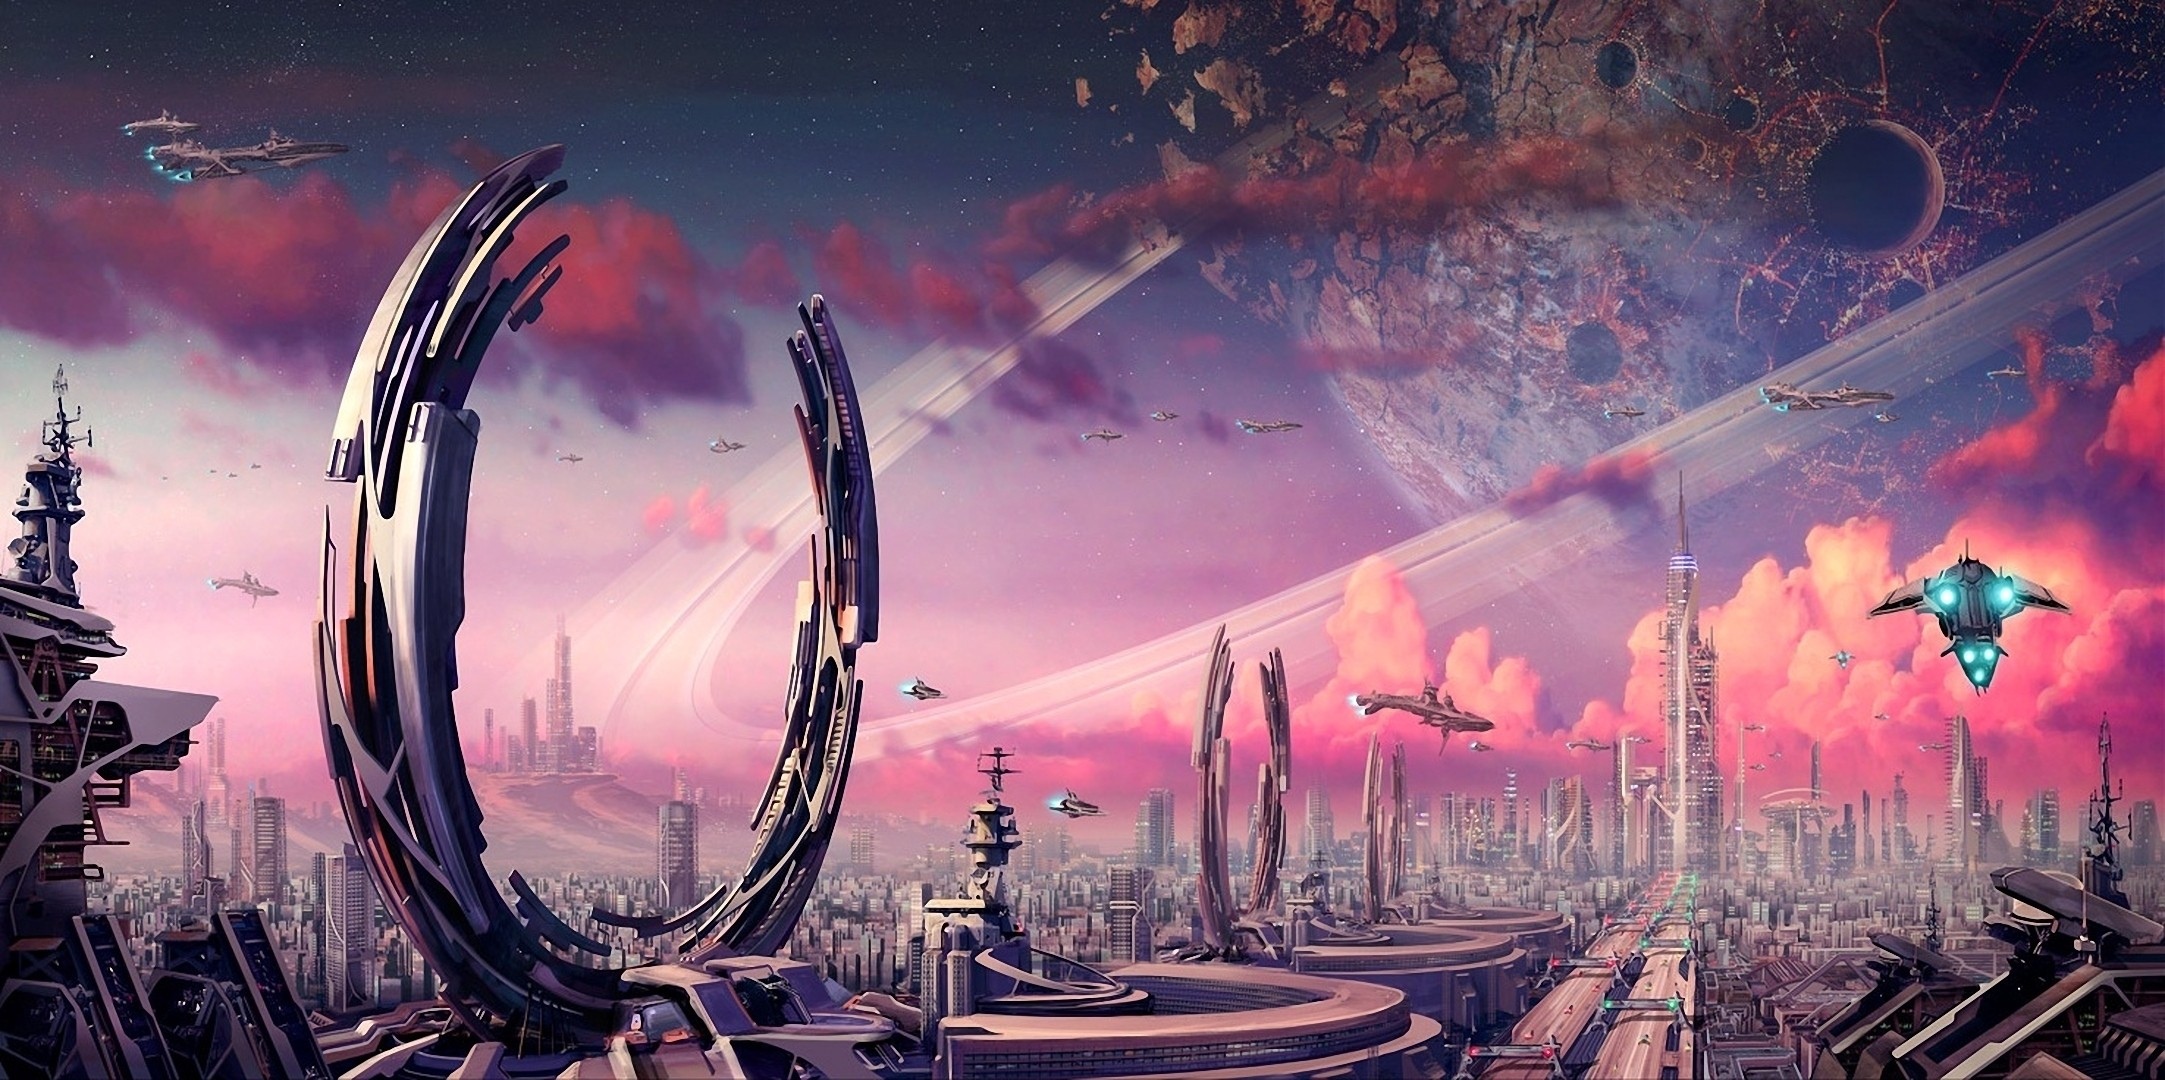 fantasy, city, transport, ships, rings, planet, fiction, that's incredible, crater, constructions, facilities